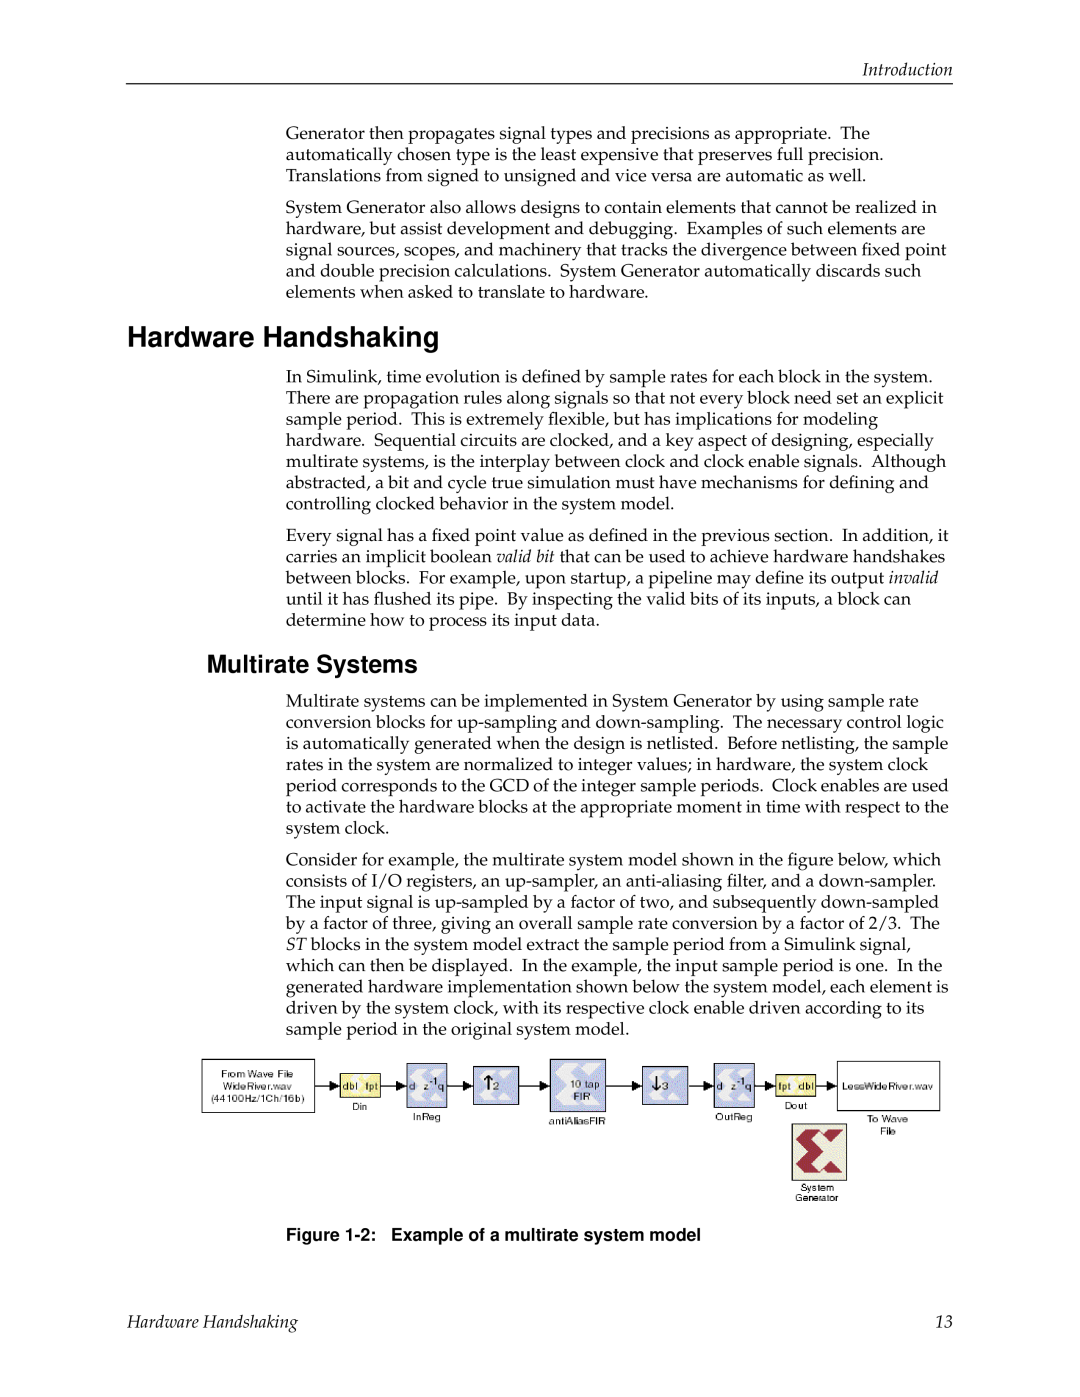 Xilinx V2.1 manual Hardware Handshaking, Multirate Systems, Introduction 